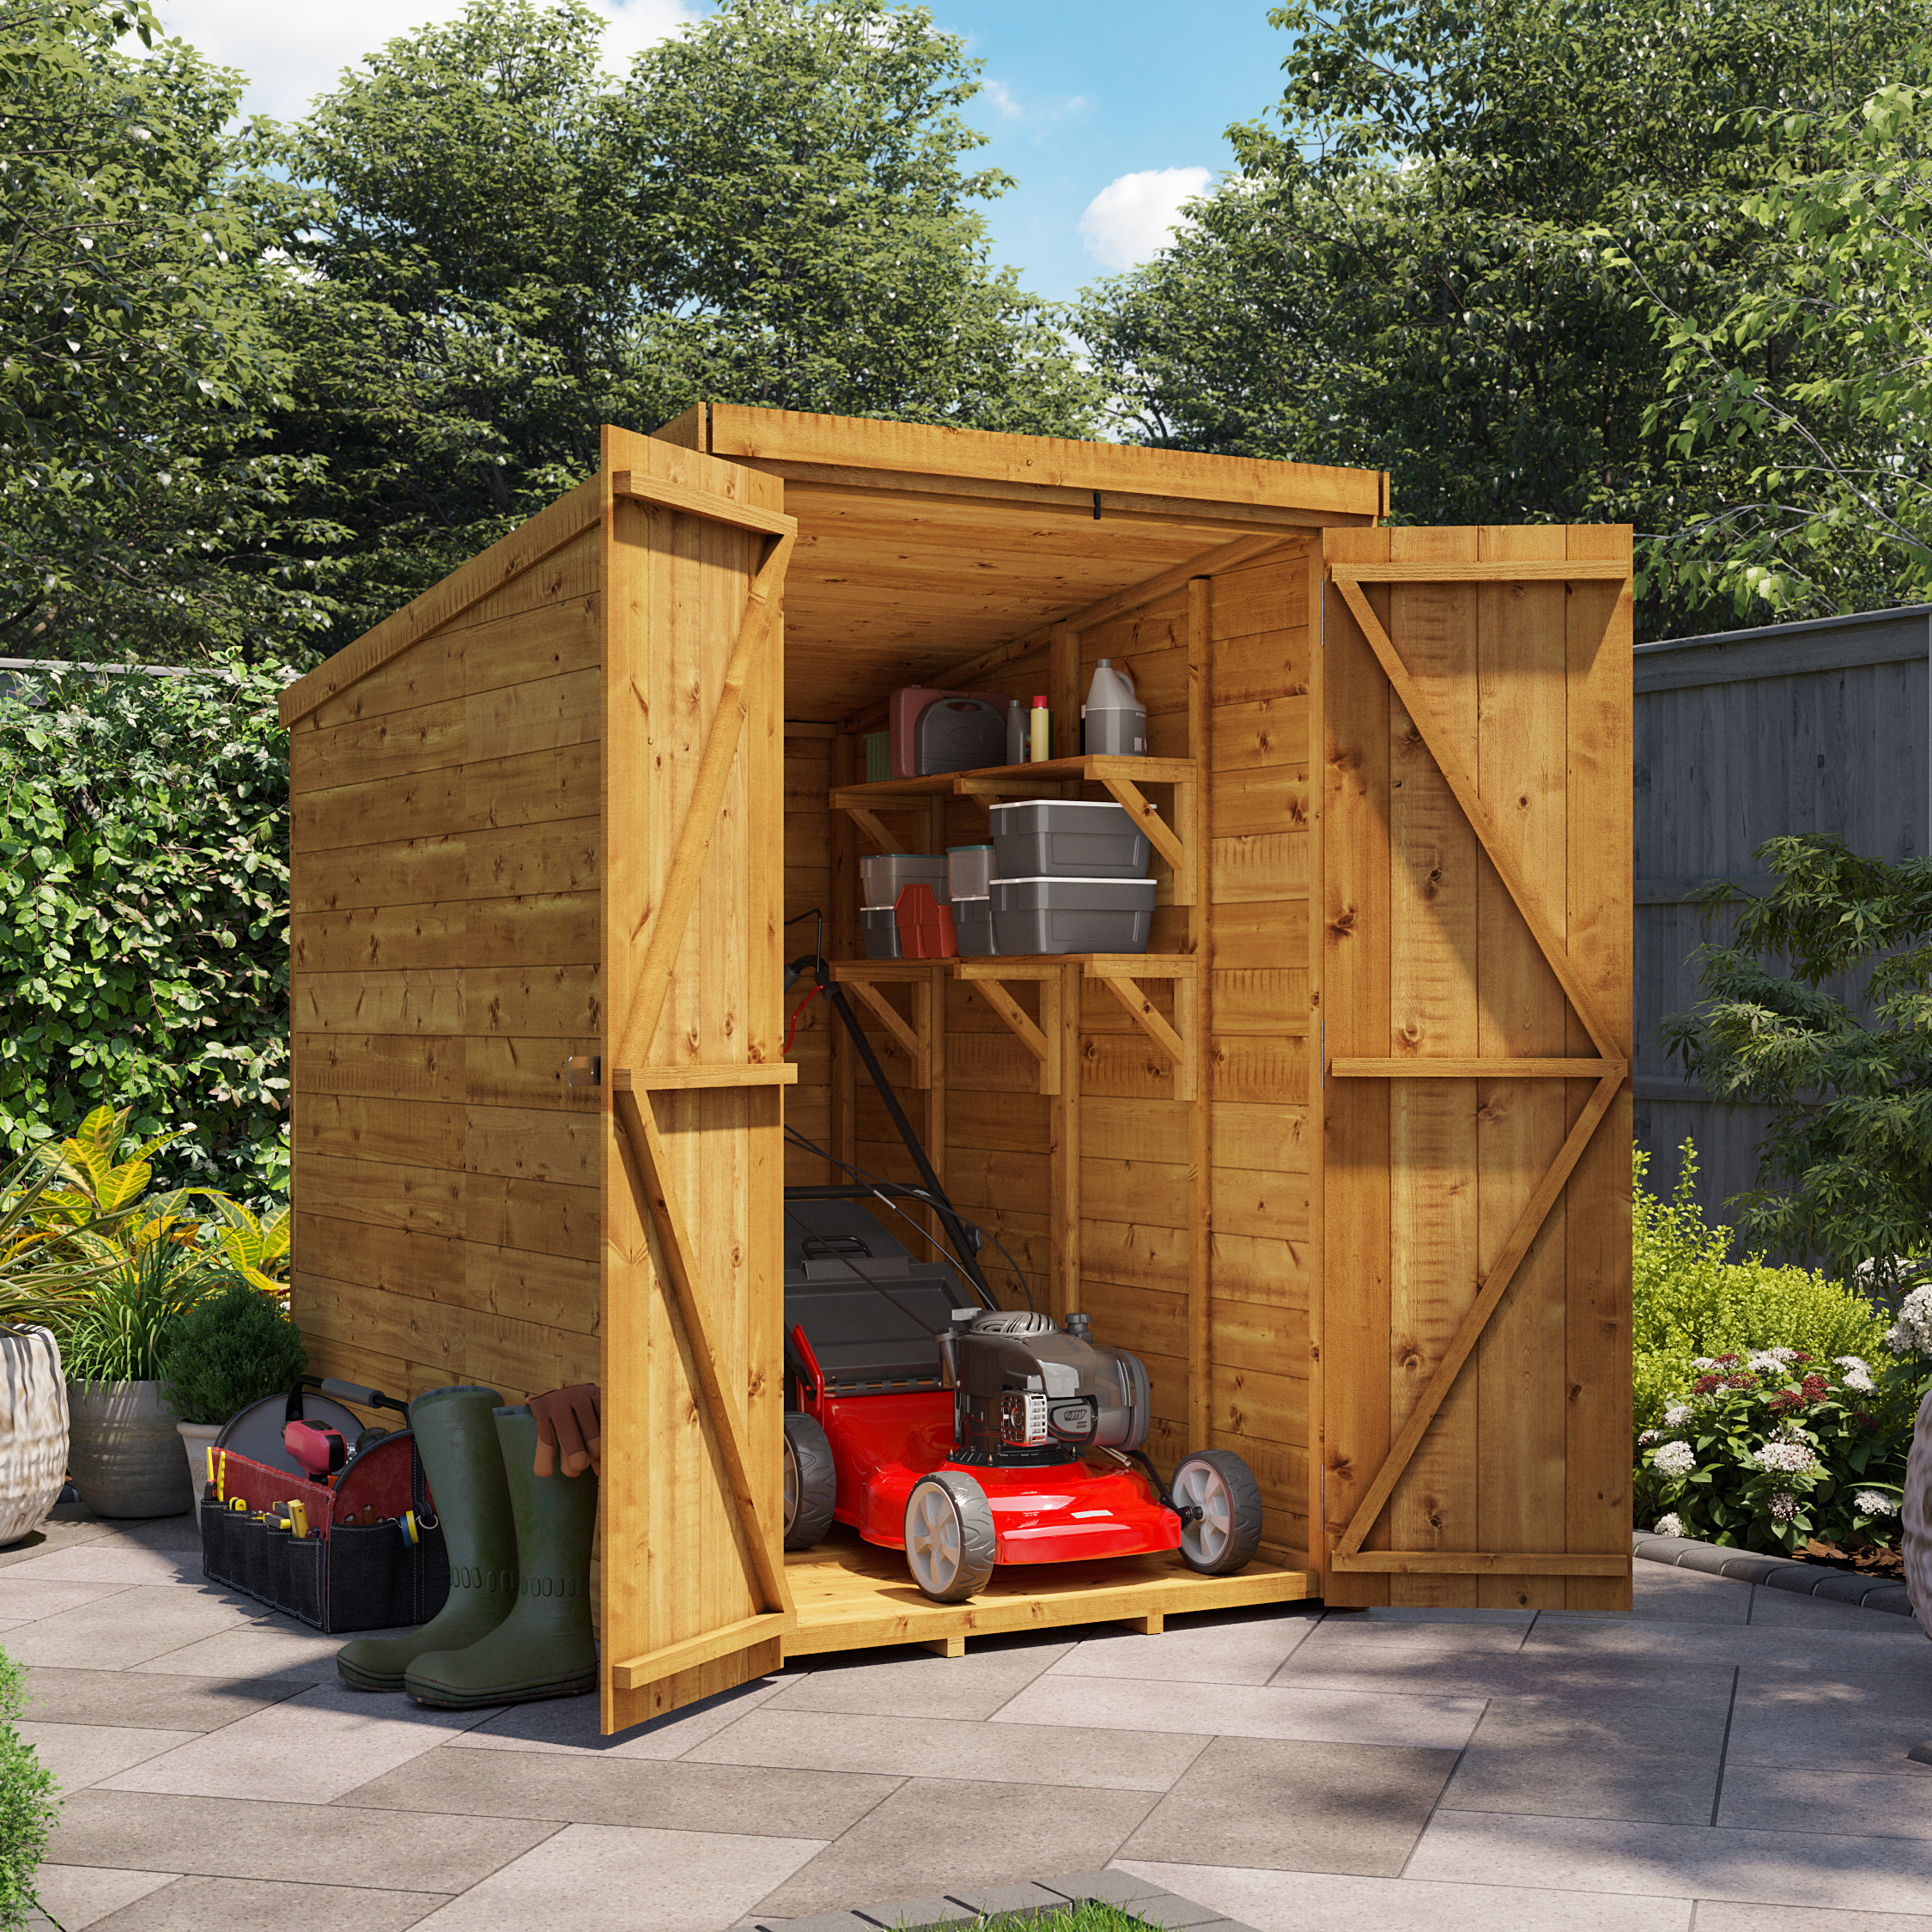 4 x 6 Shed - BillyOh Master Tongue and Groove Pent Shed - 4x6 Wooden Shed